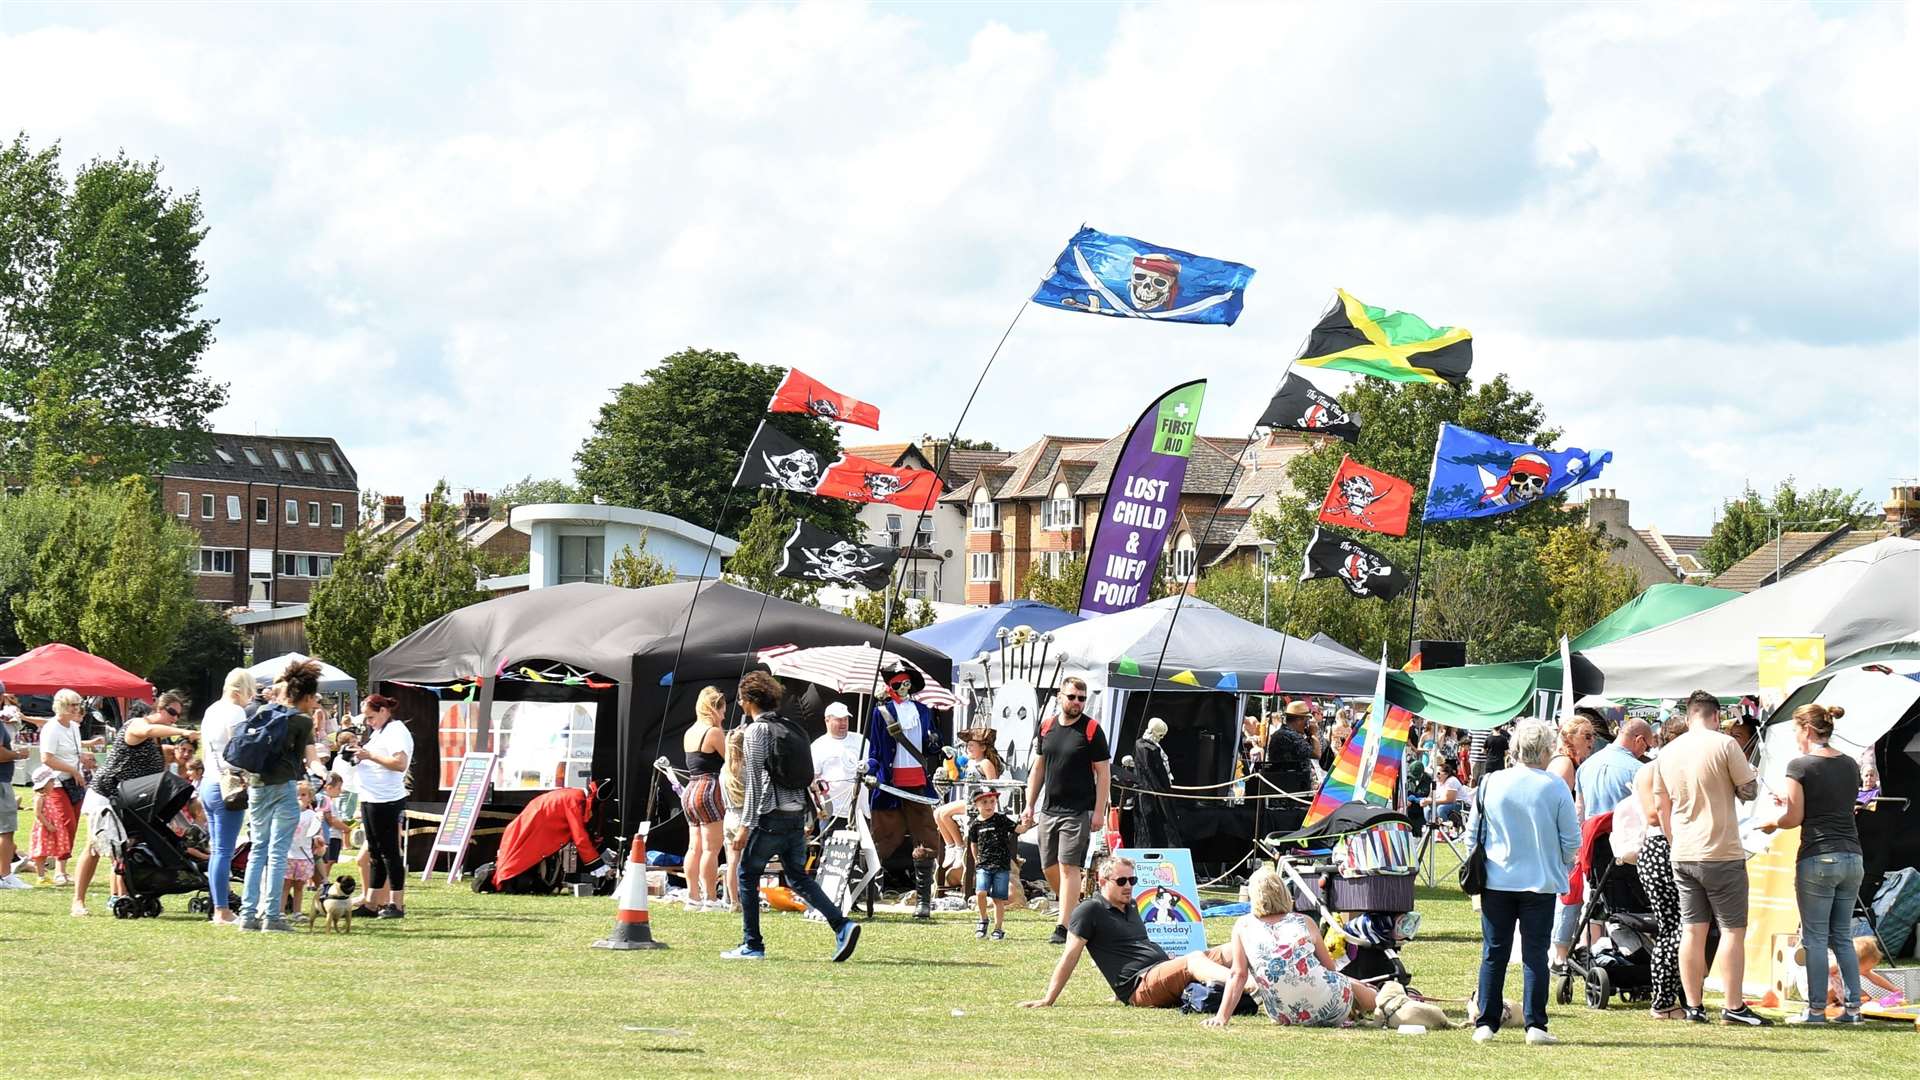 The event at Herne Bay's Memorial Park featured live wrestling, Punch and Judy and magic shows. Picture: Stuart Woods